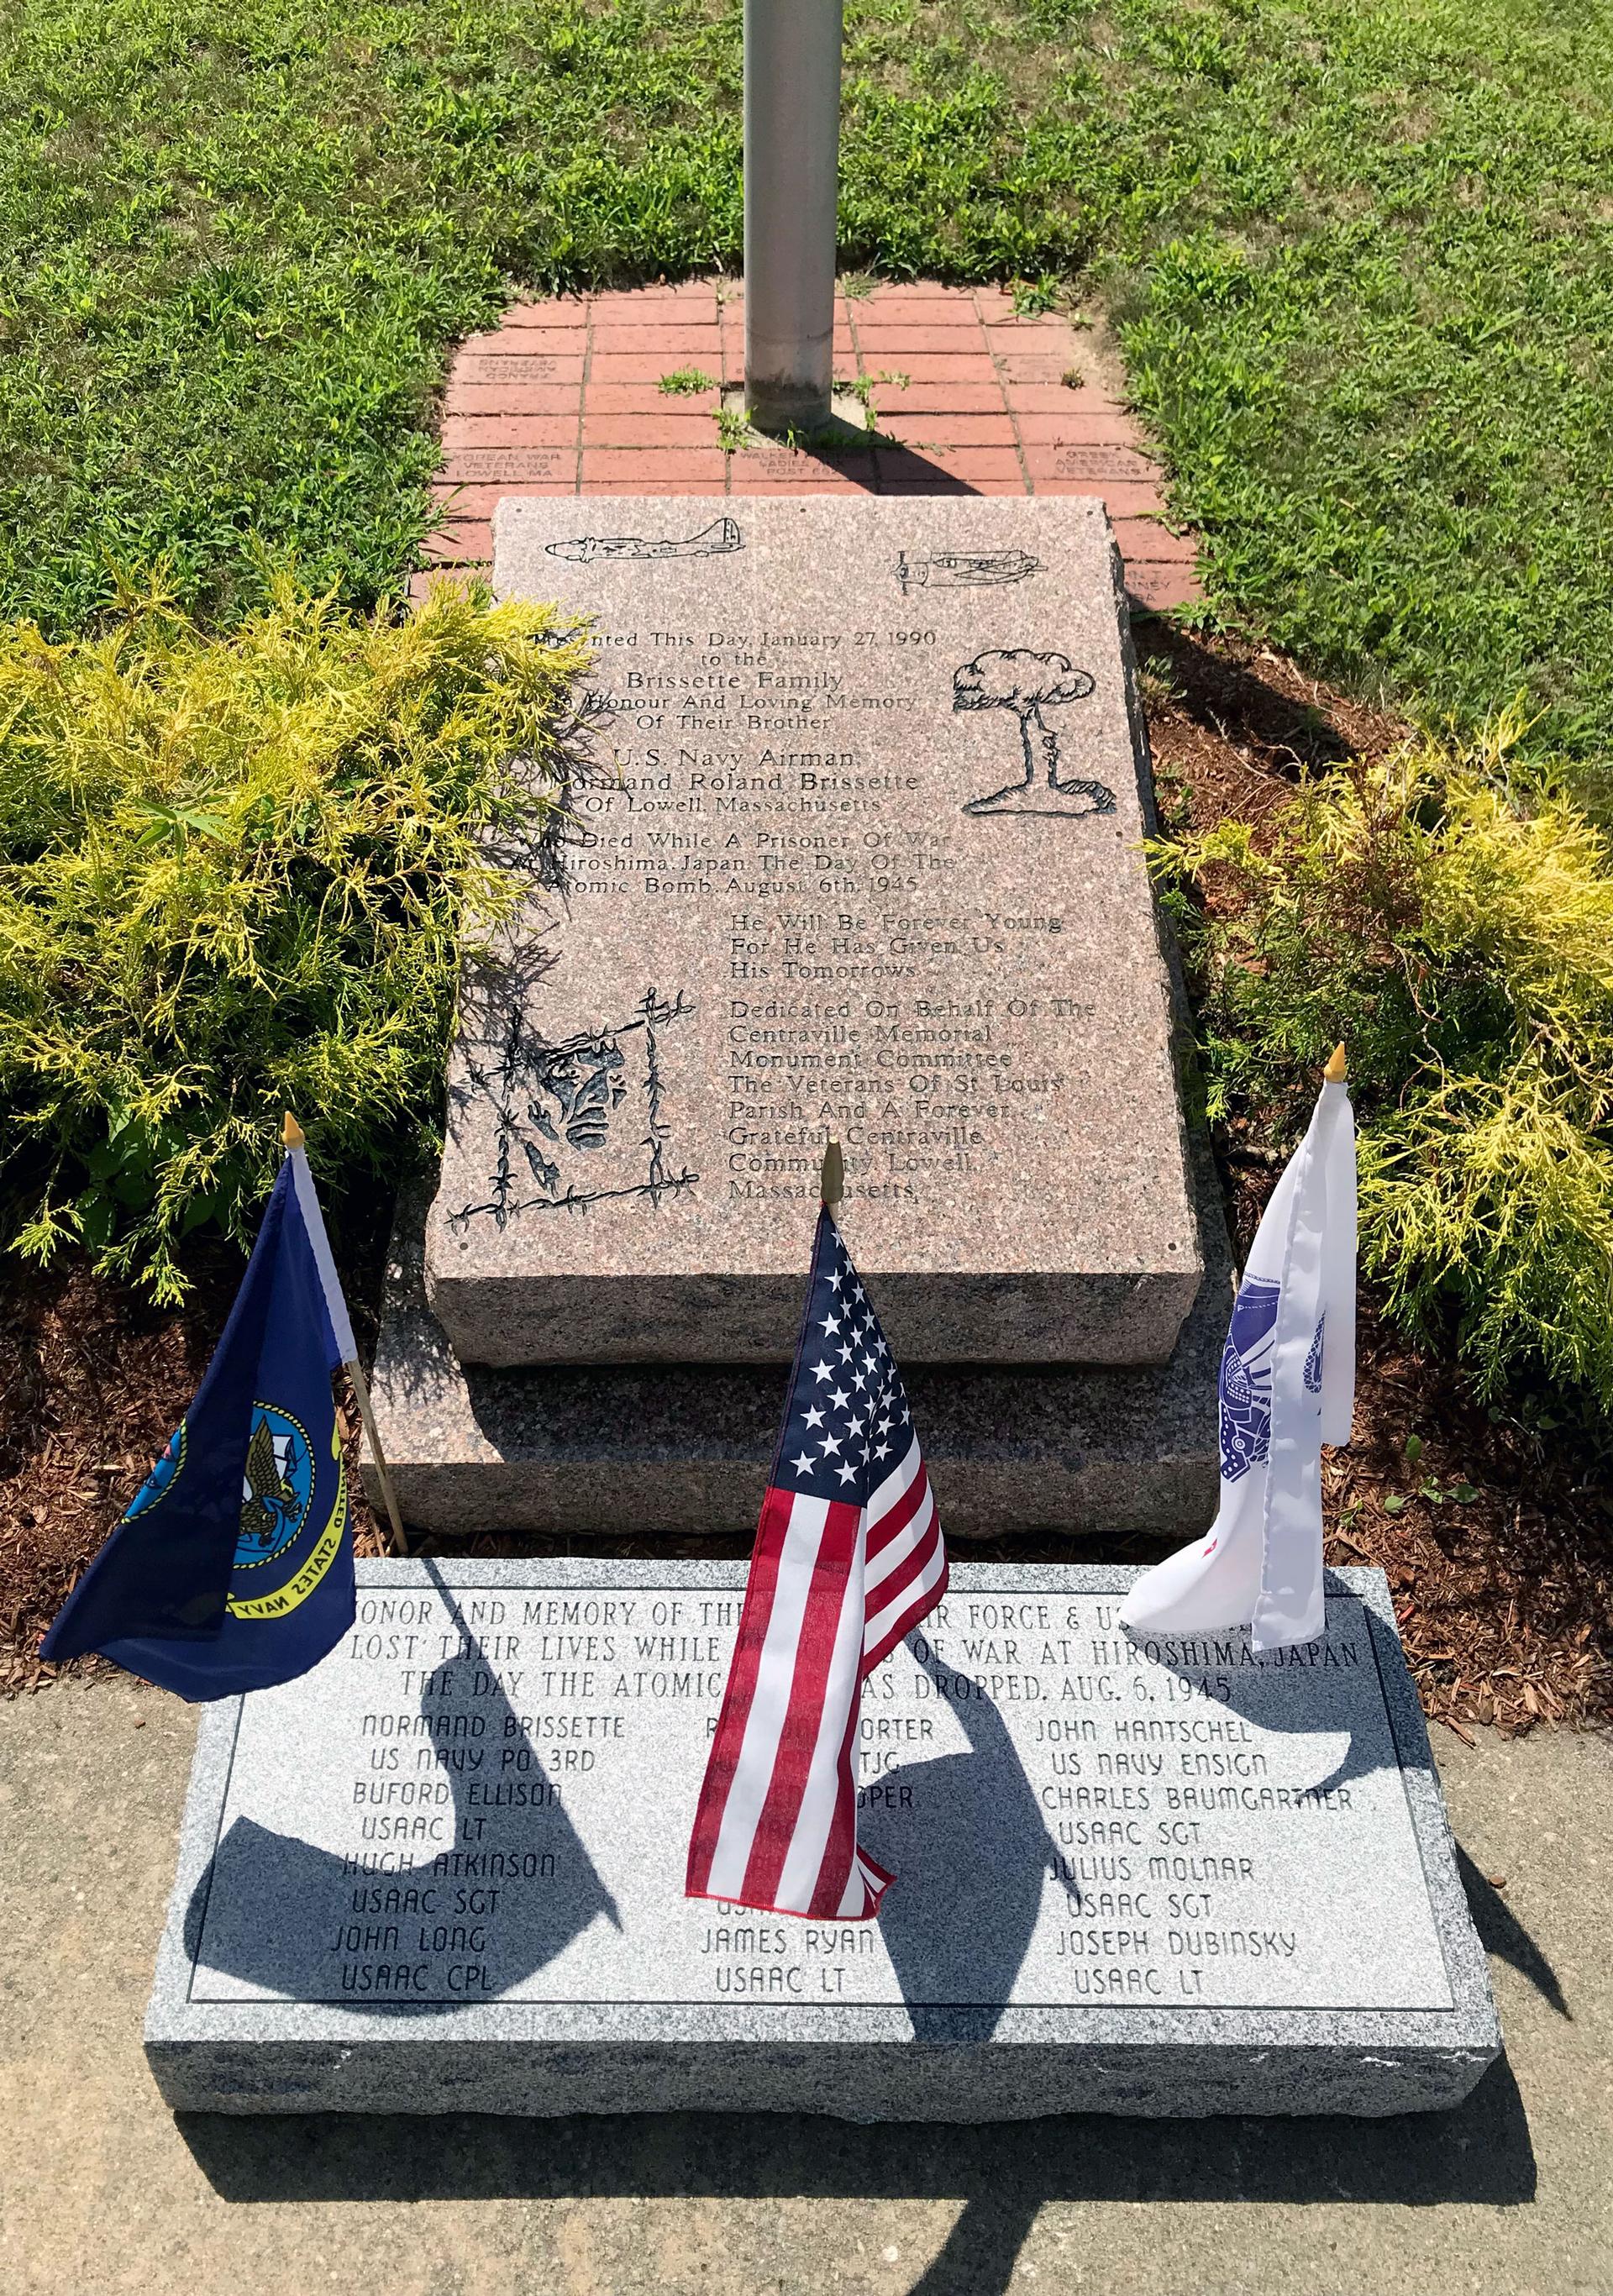 Flags hang next to a stone memorial engraved with names